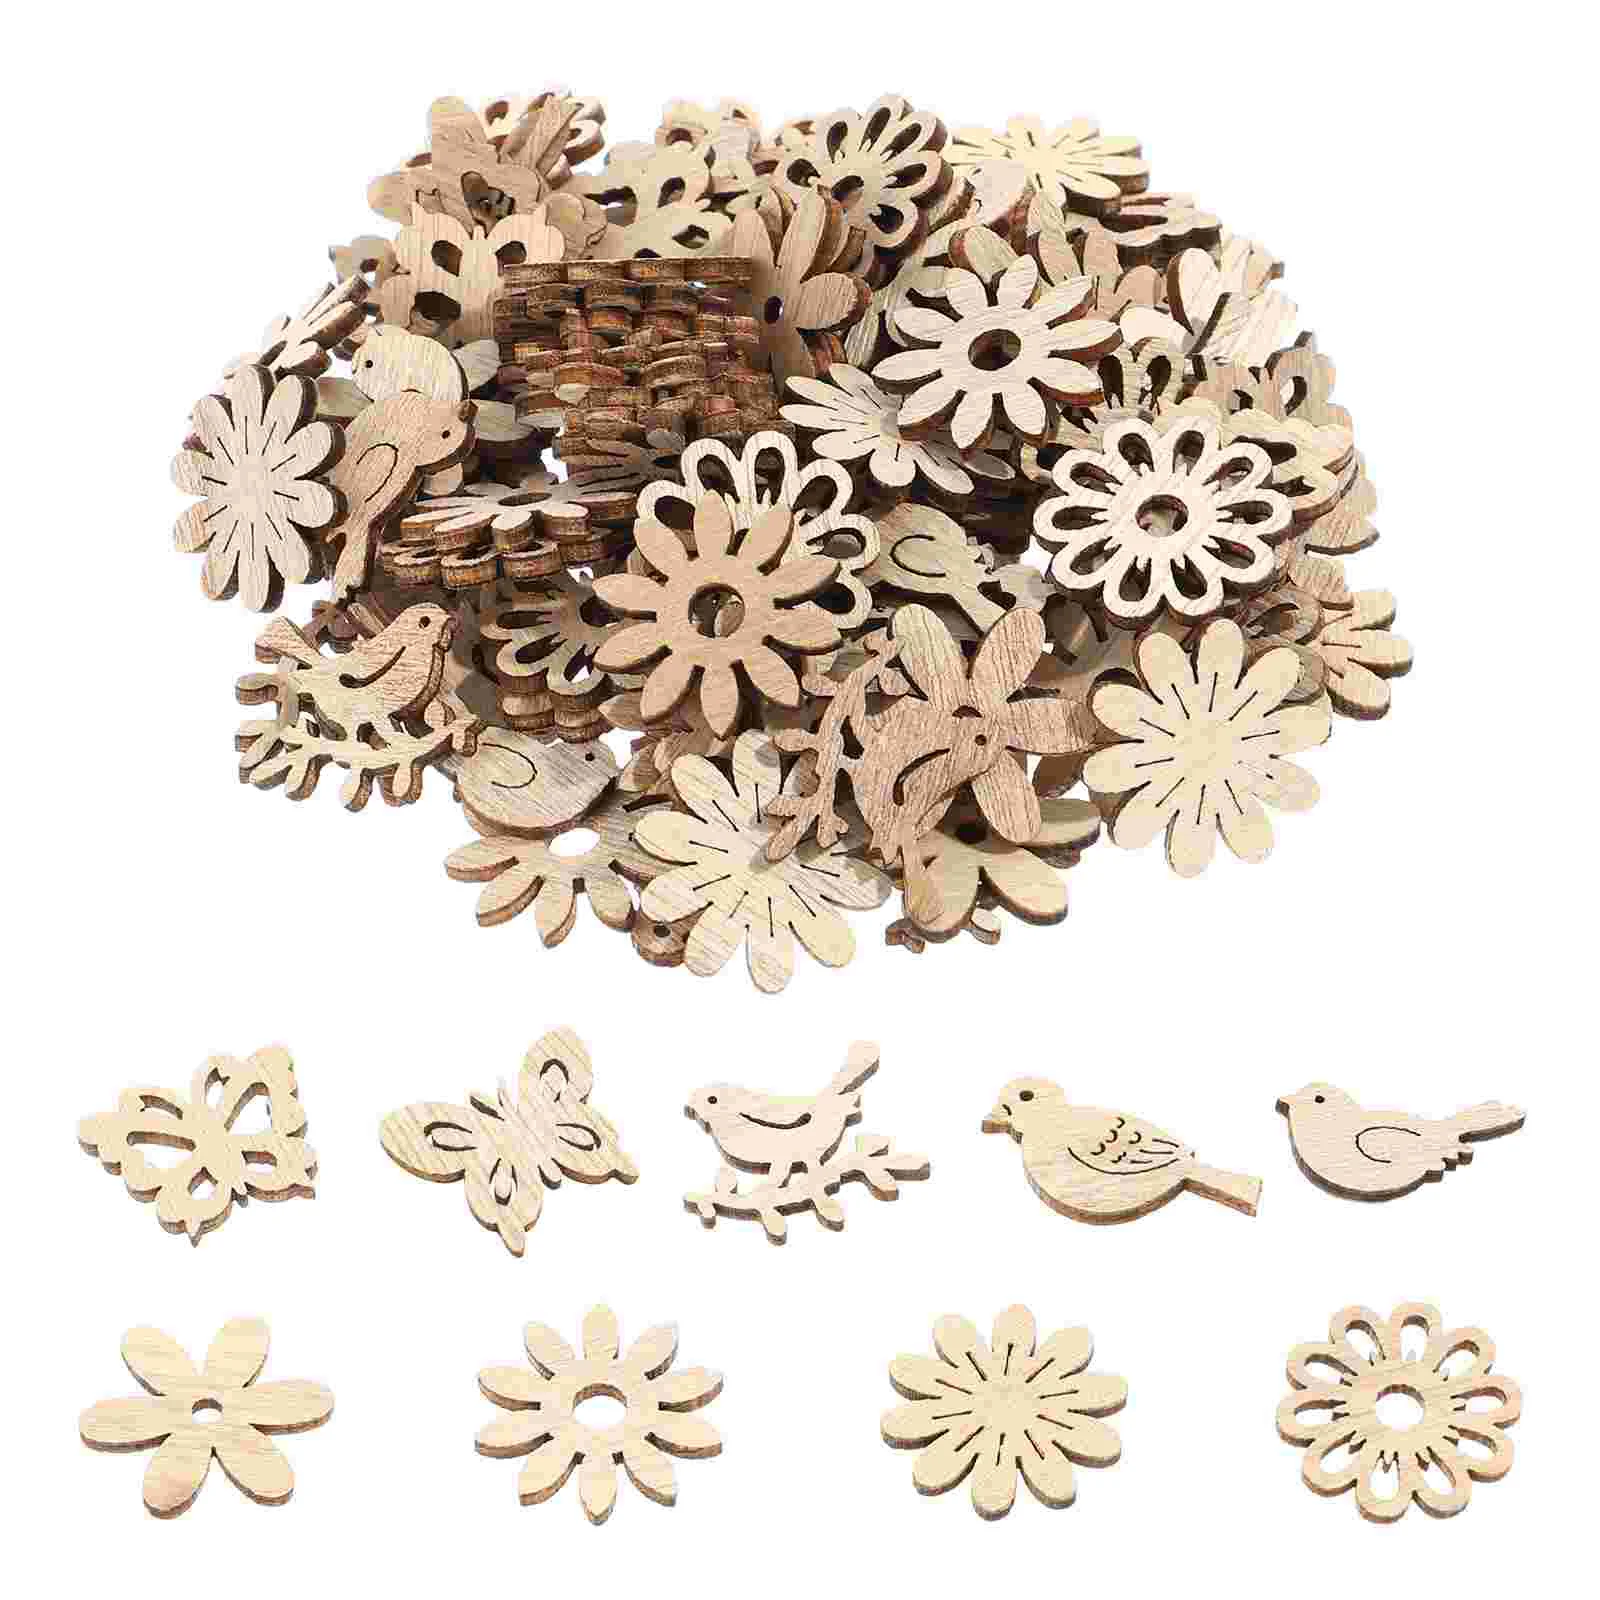 

Wood Wooden Crafts Ornaments Unfinished Cutouts Slices Flowers Diy Legno Flower Shapes Blank Blanks Birds Craft Slice Shape